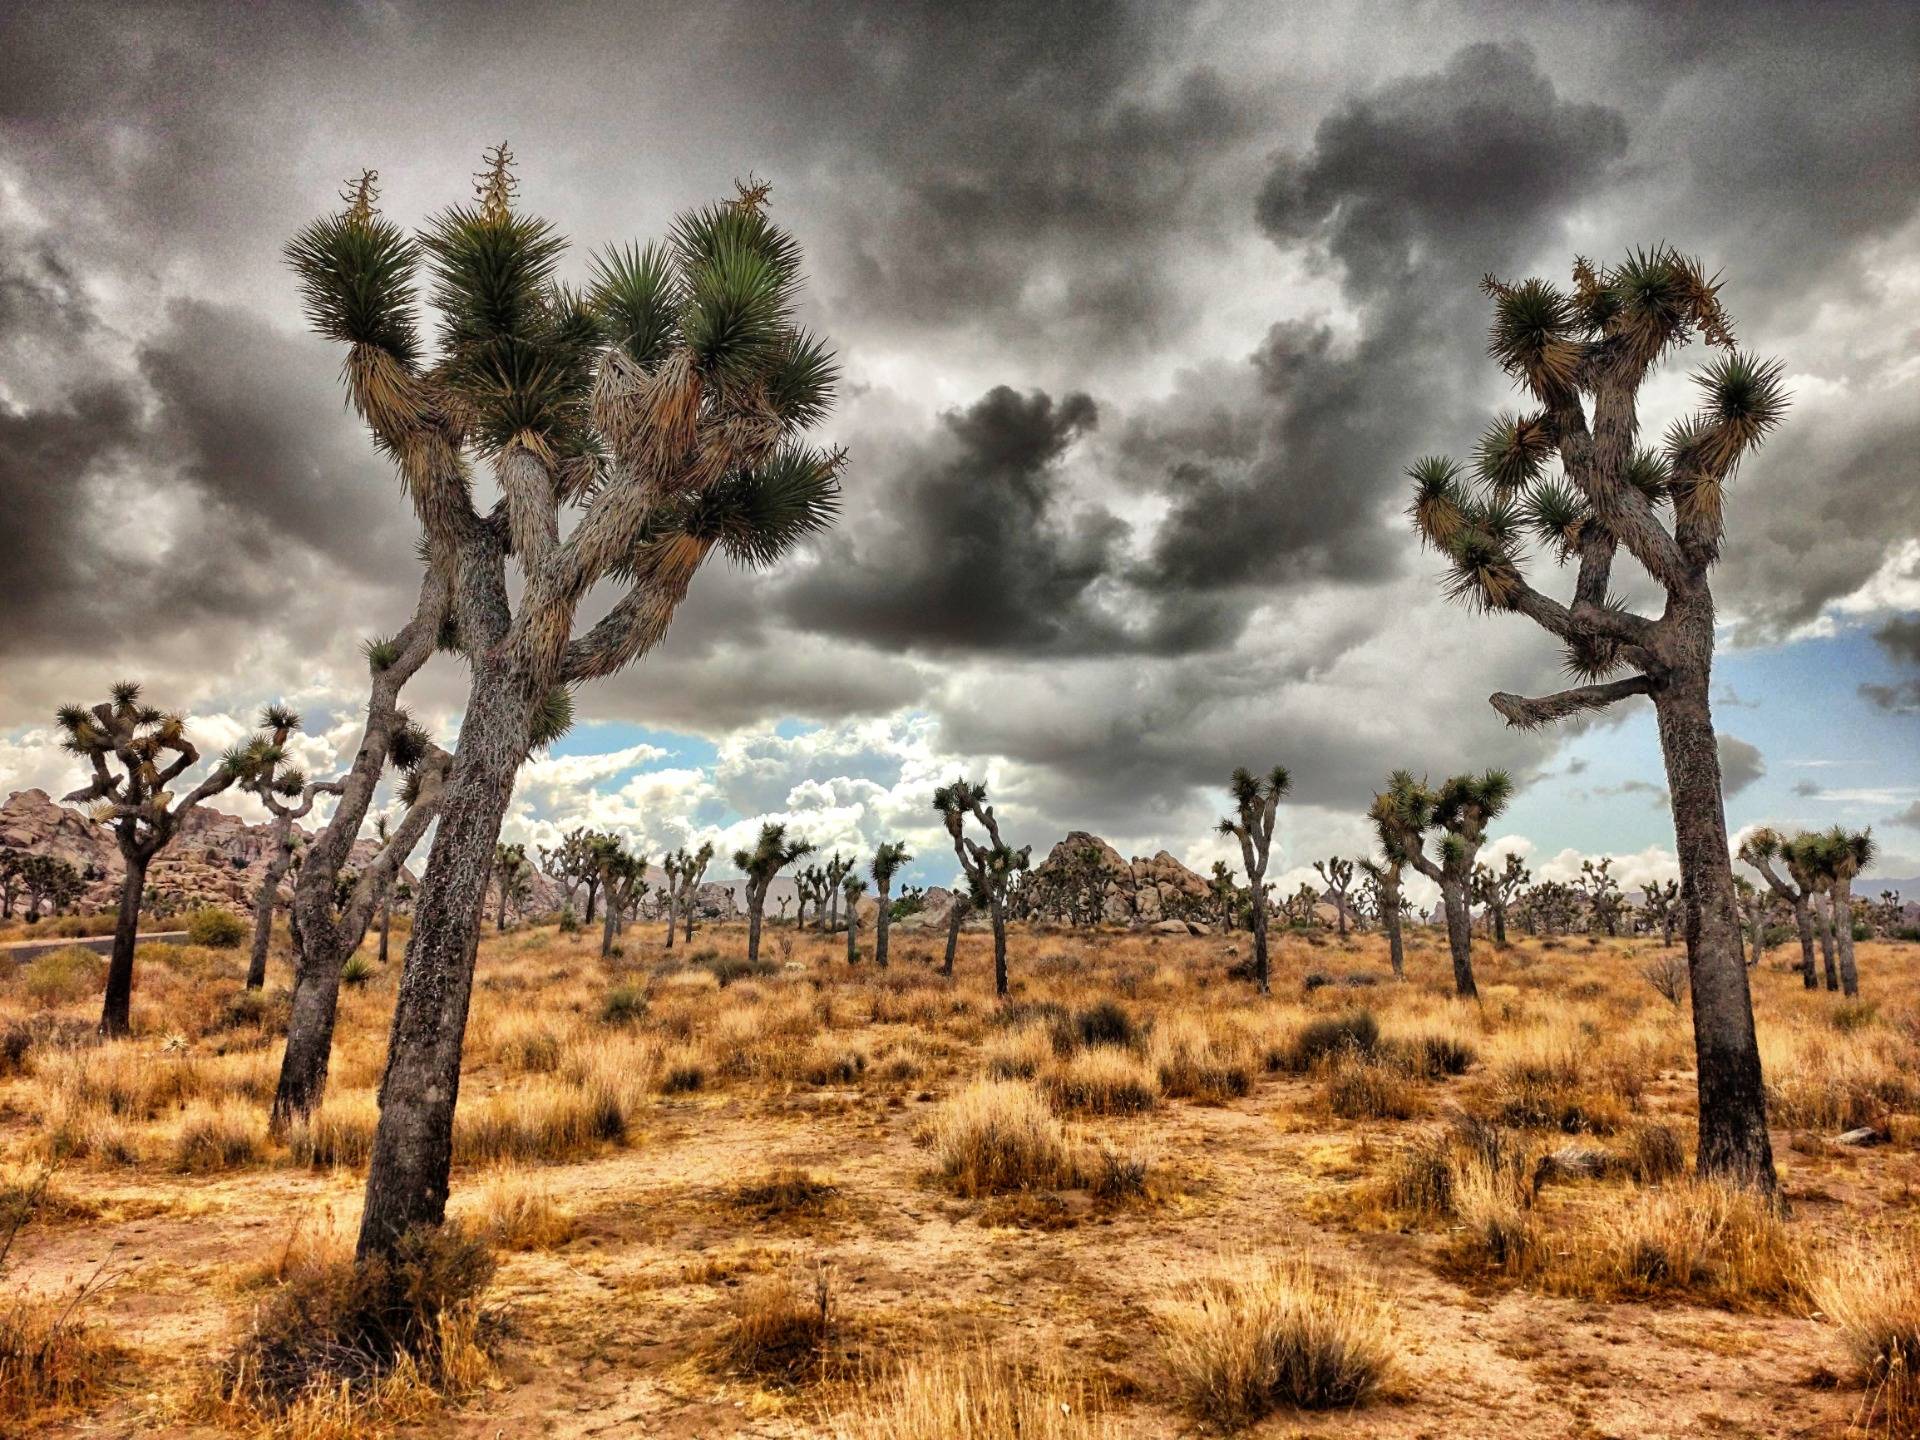 Joshua Tree: Holy trees under a blood red sky